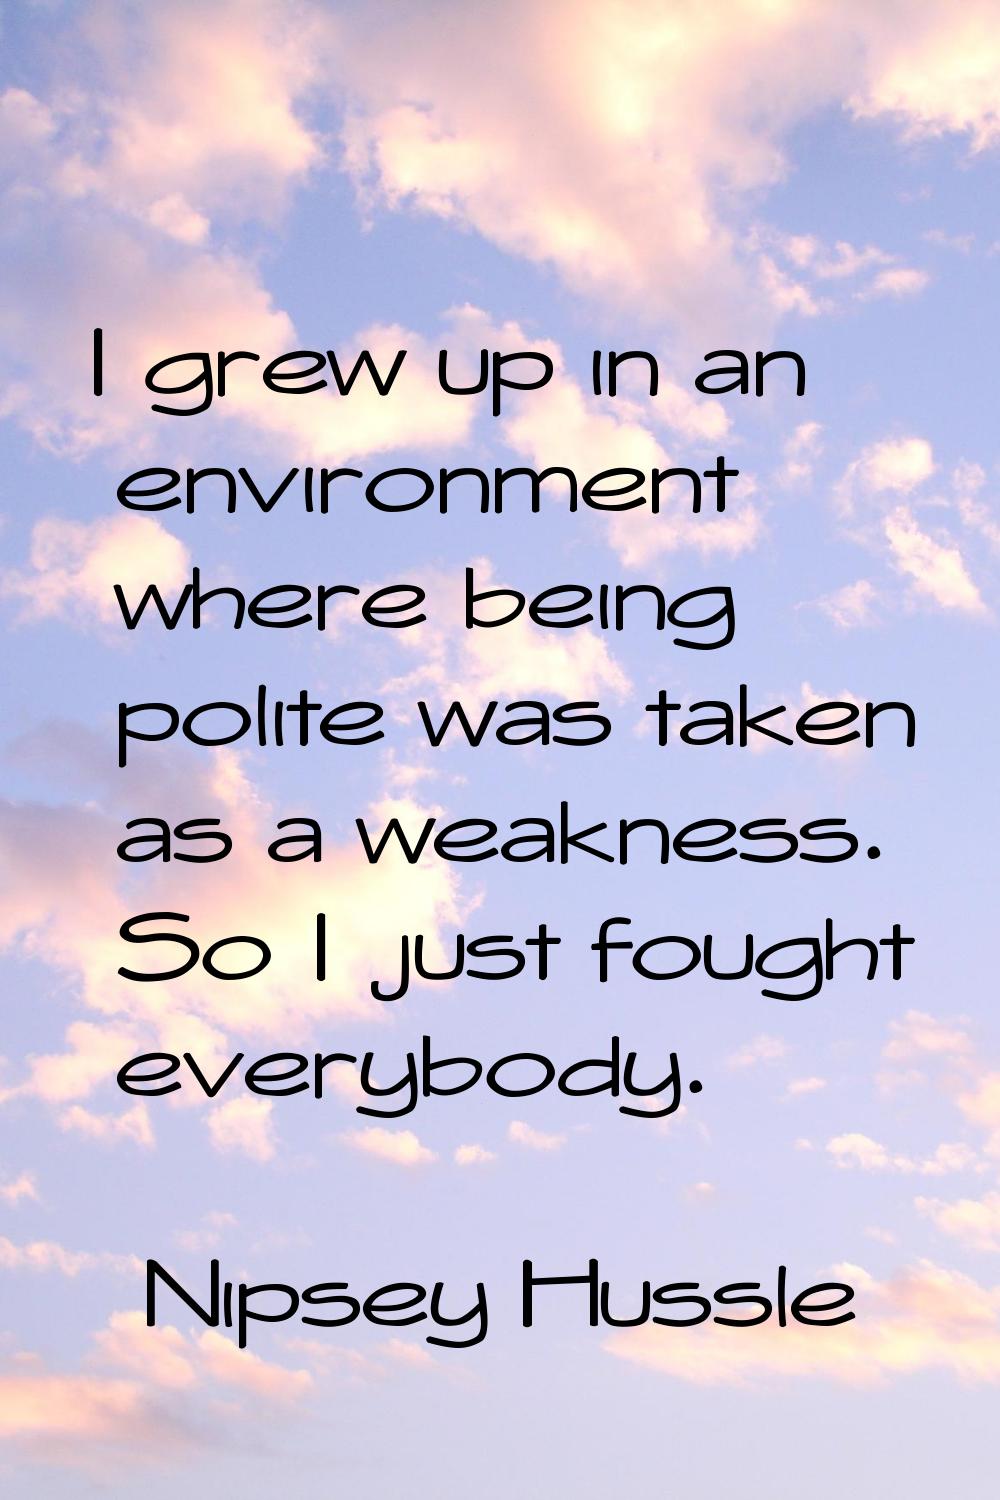 I grew up in an environment where being polite was taken as a weakness. So I just fought everybody.